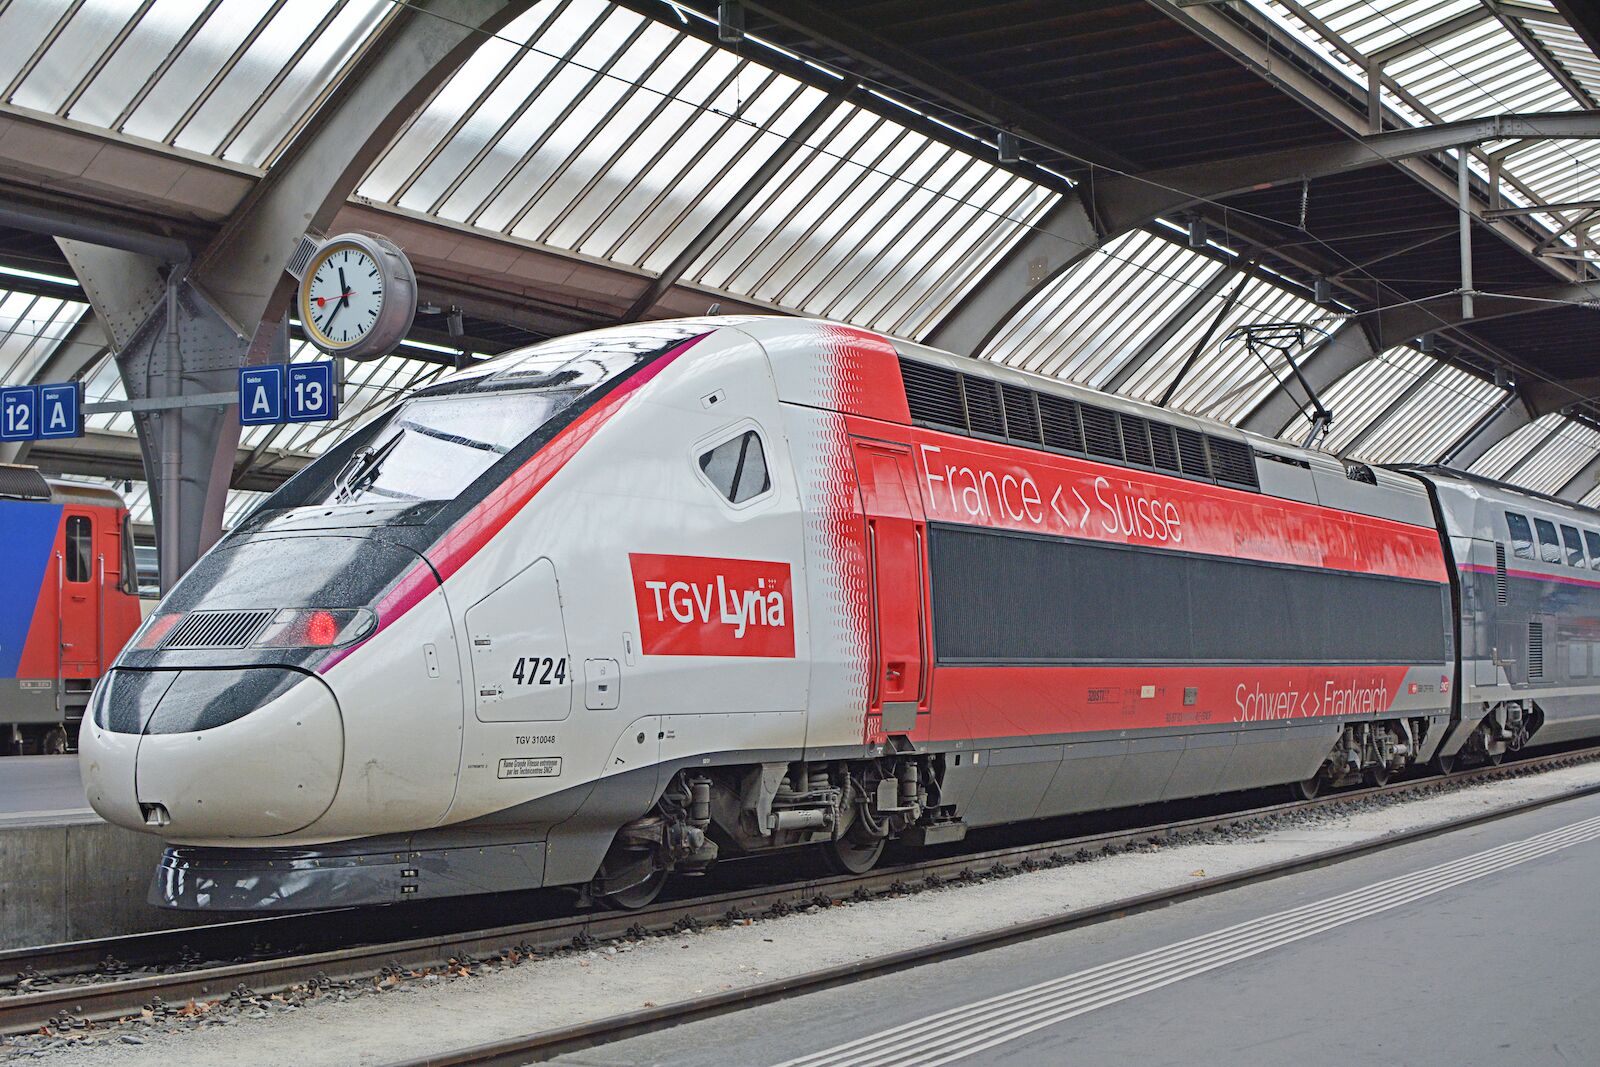 TGV Lyria is a high-speed train that connect Paris to Zurich directly